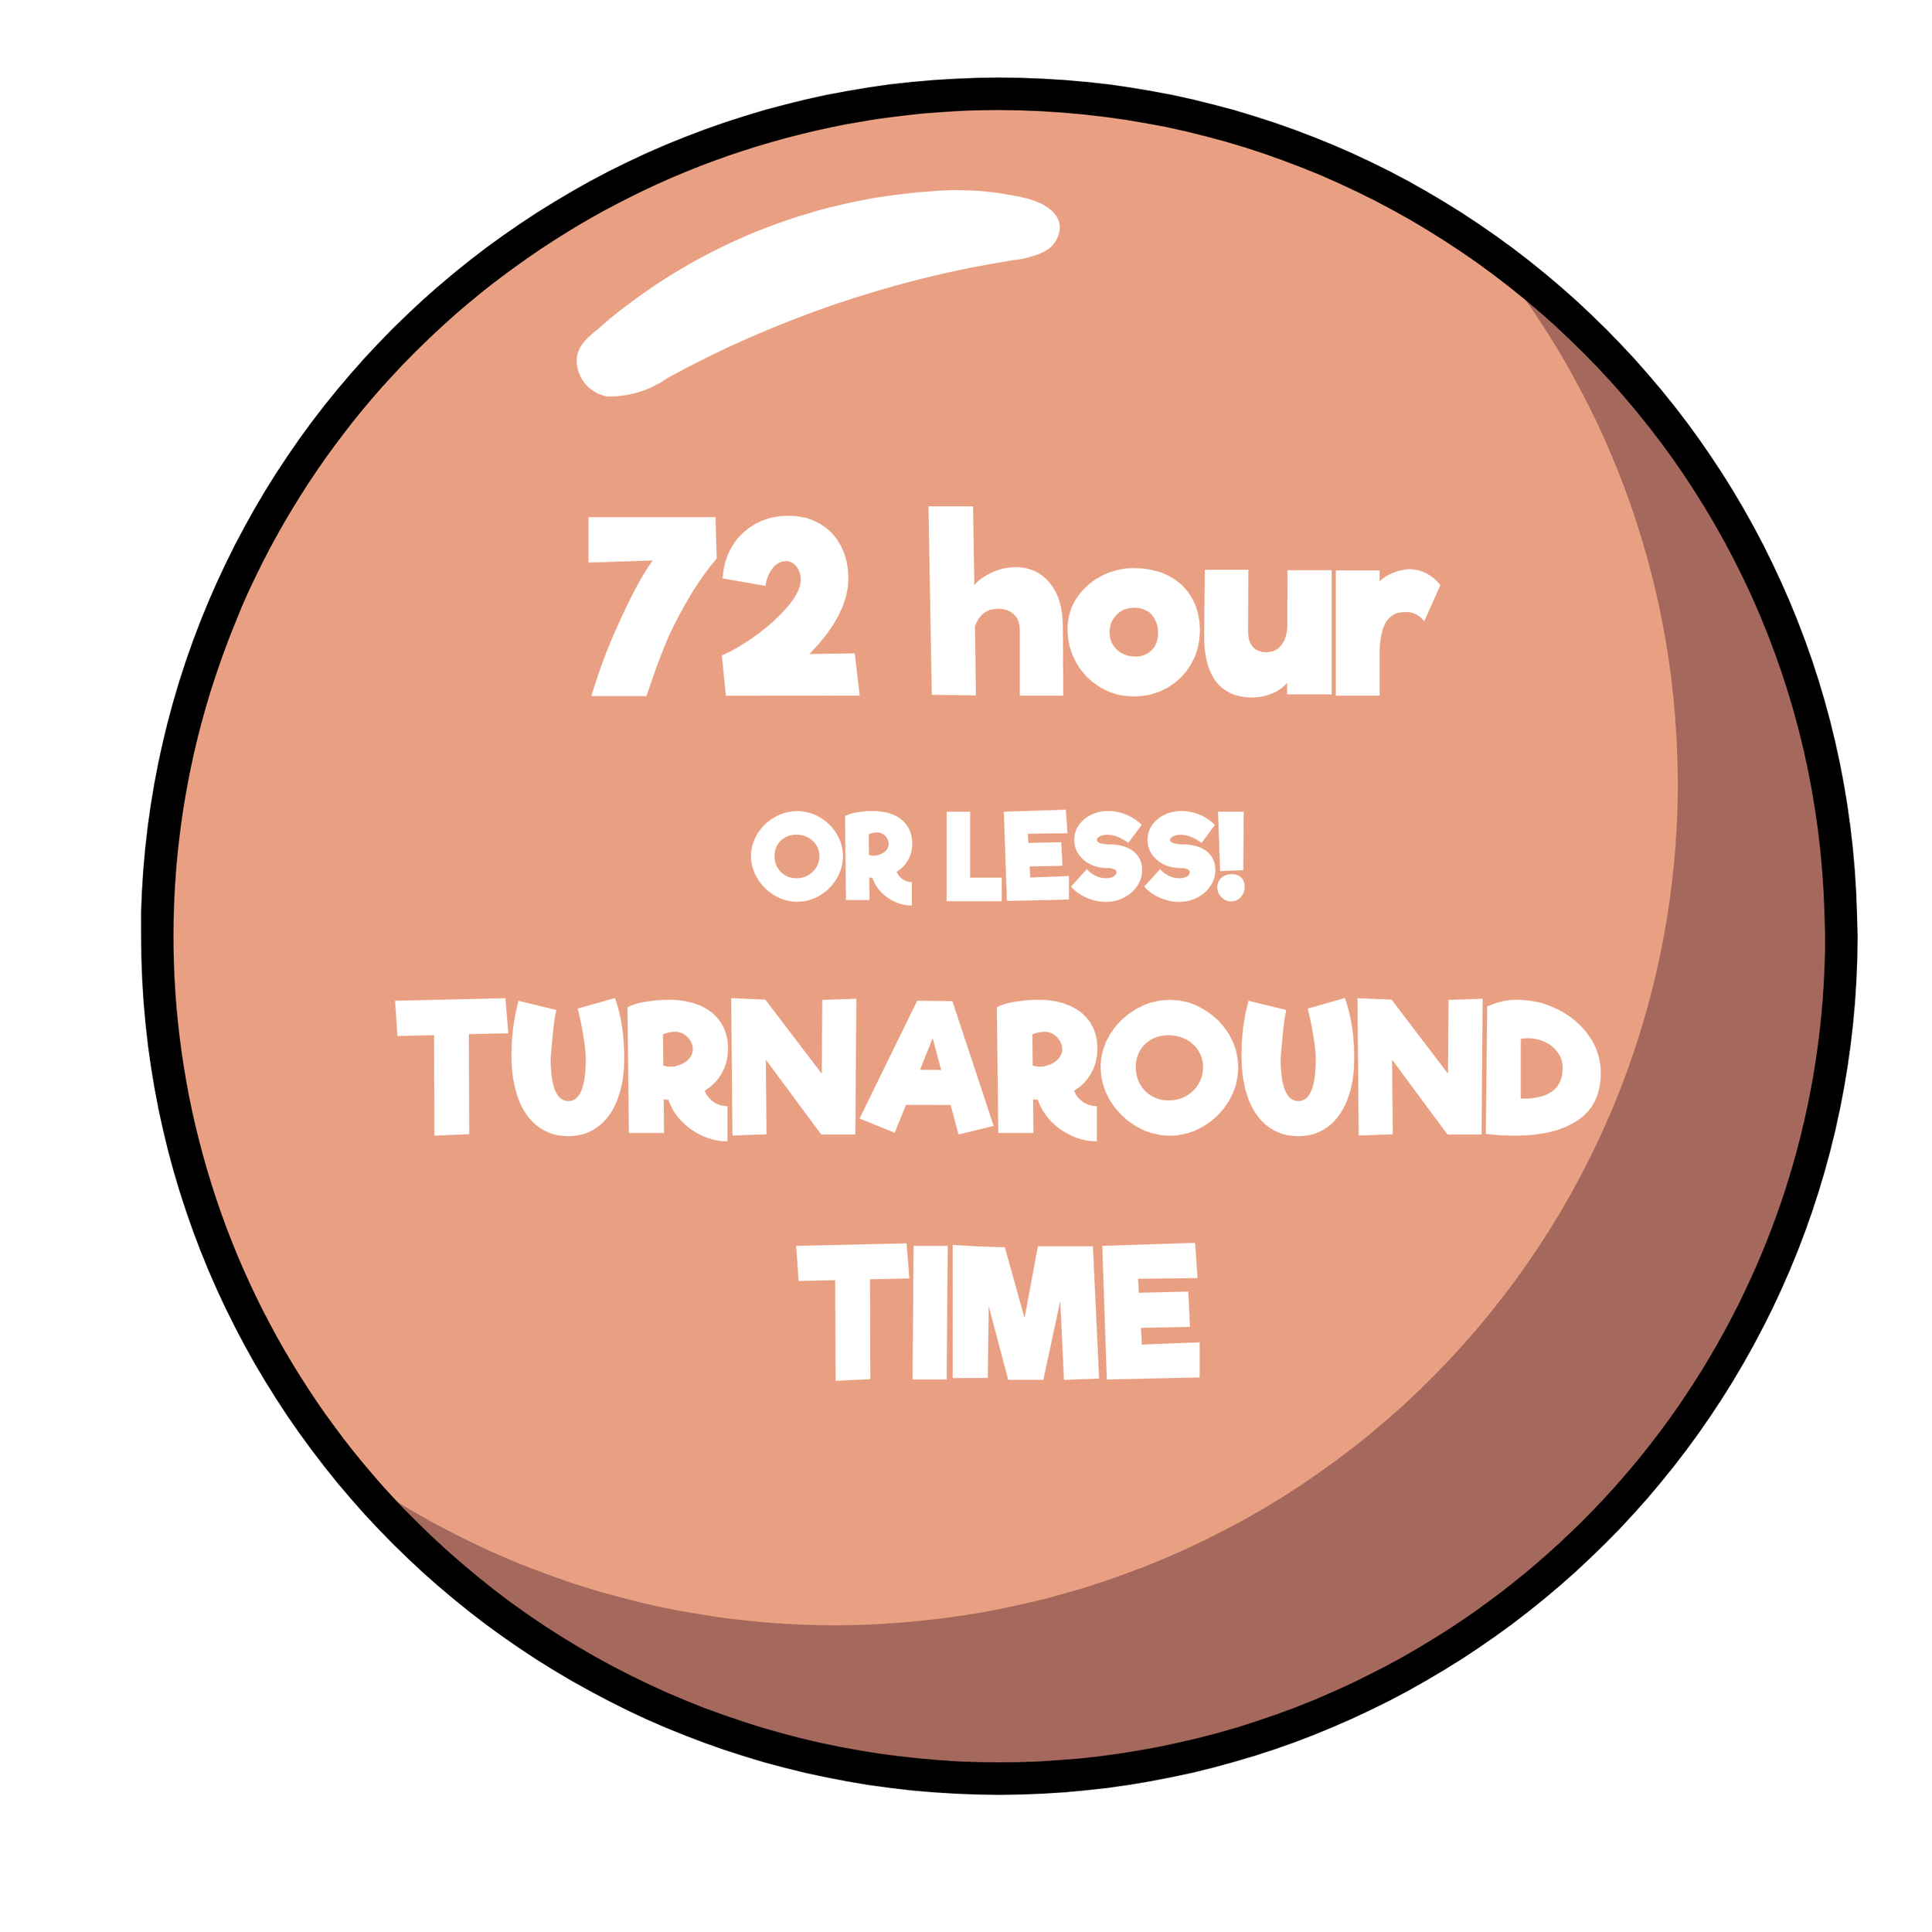 a round pink button with white text